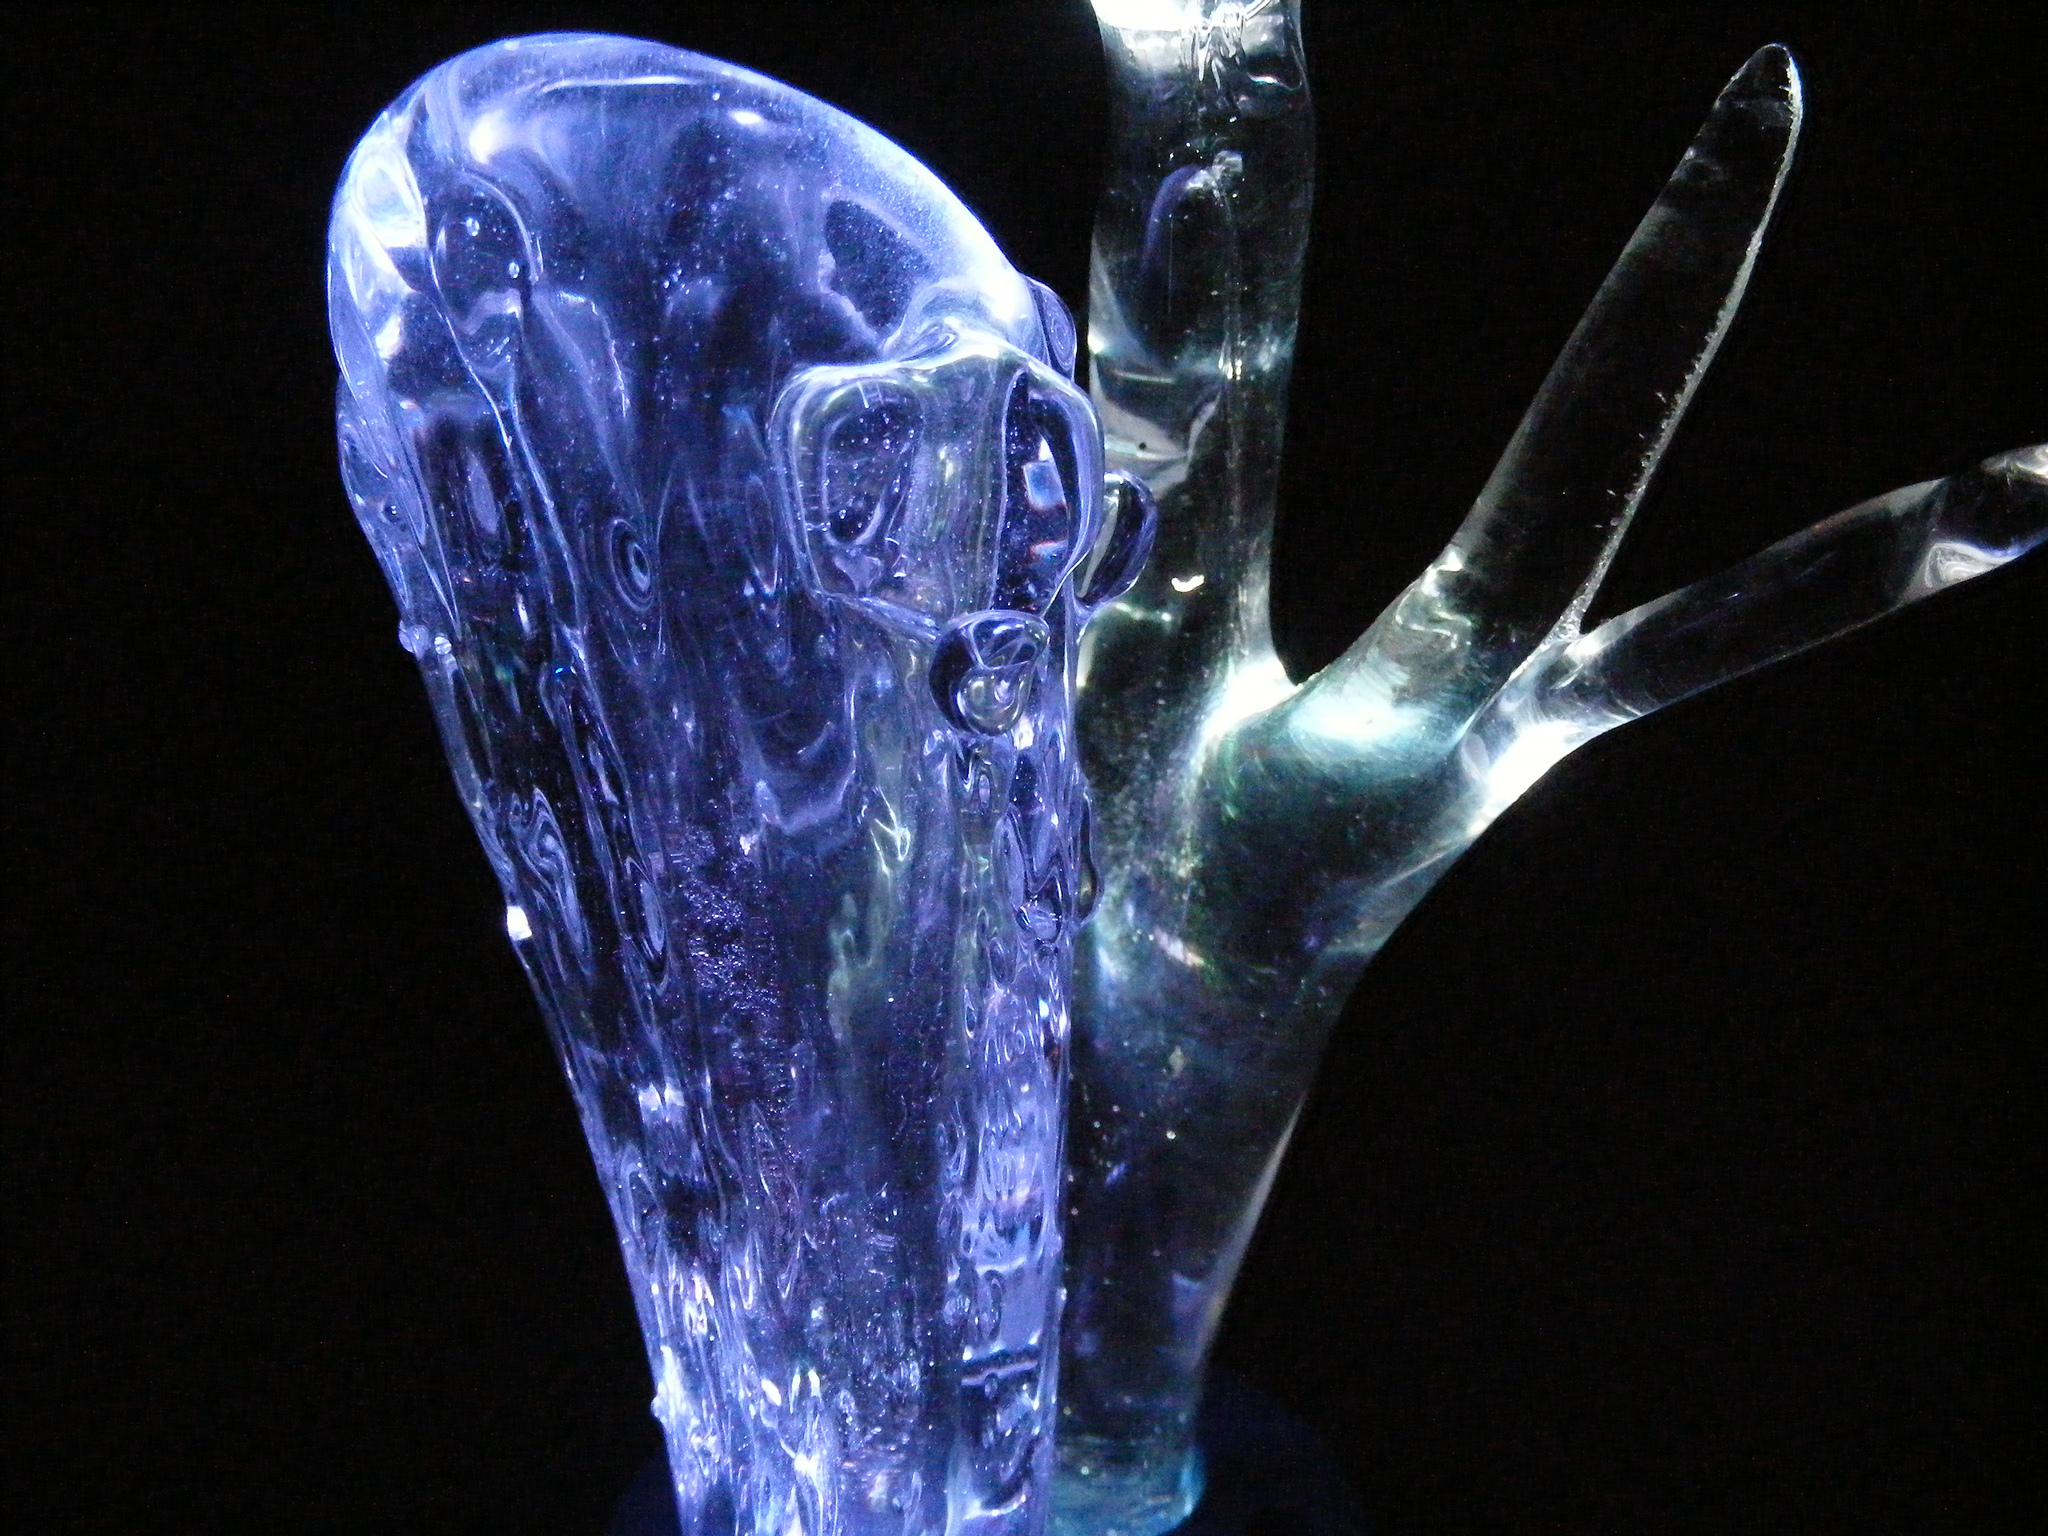 Illuminated glass art commission and Klein bottle gift